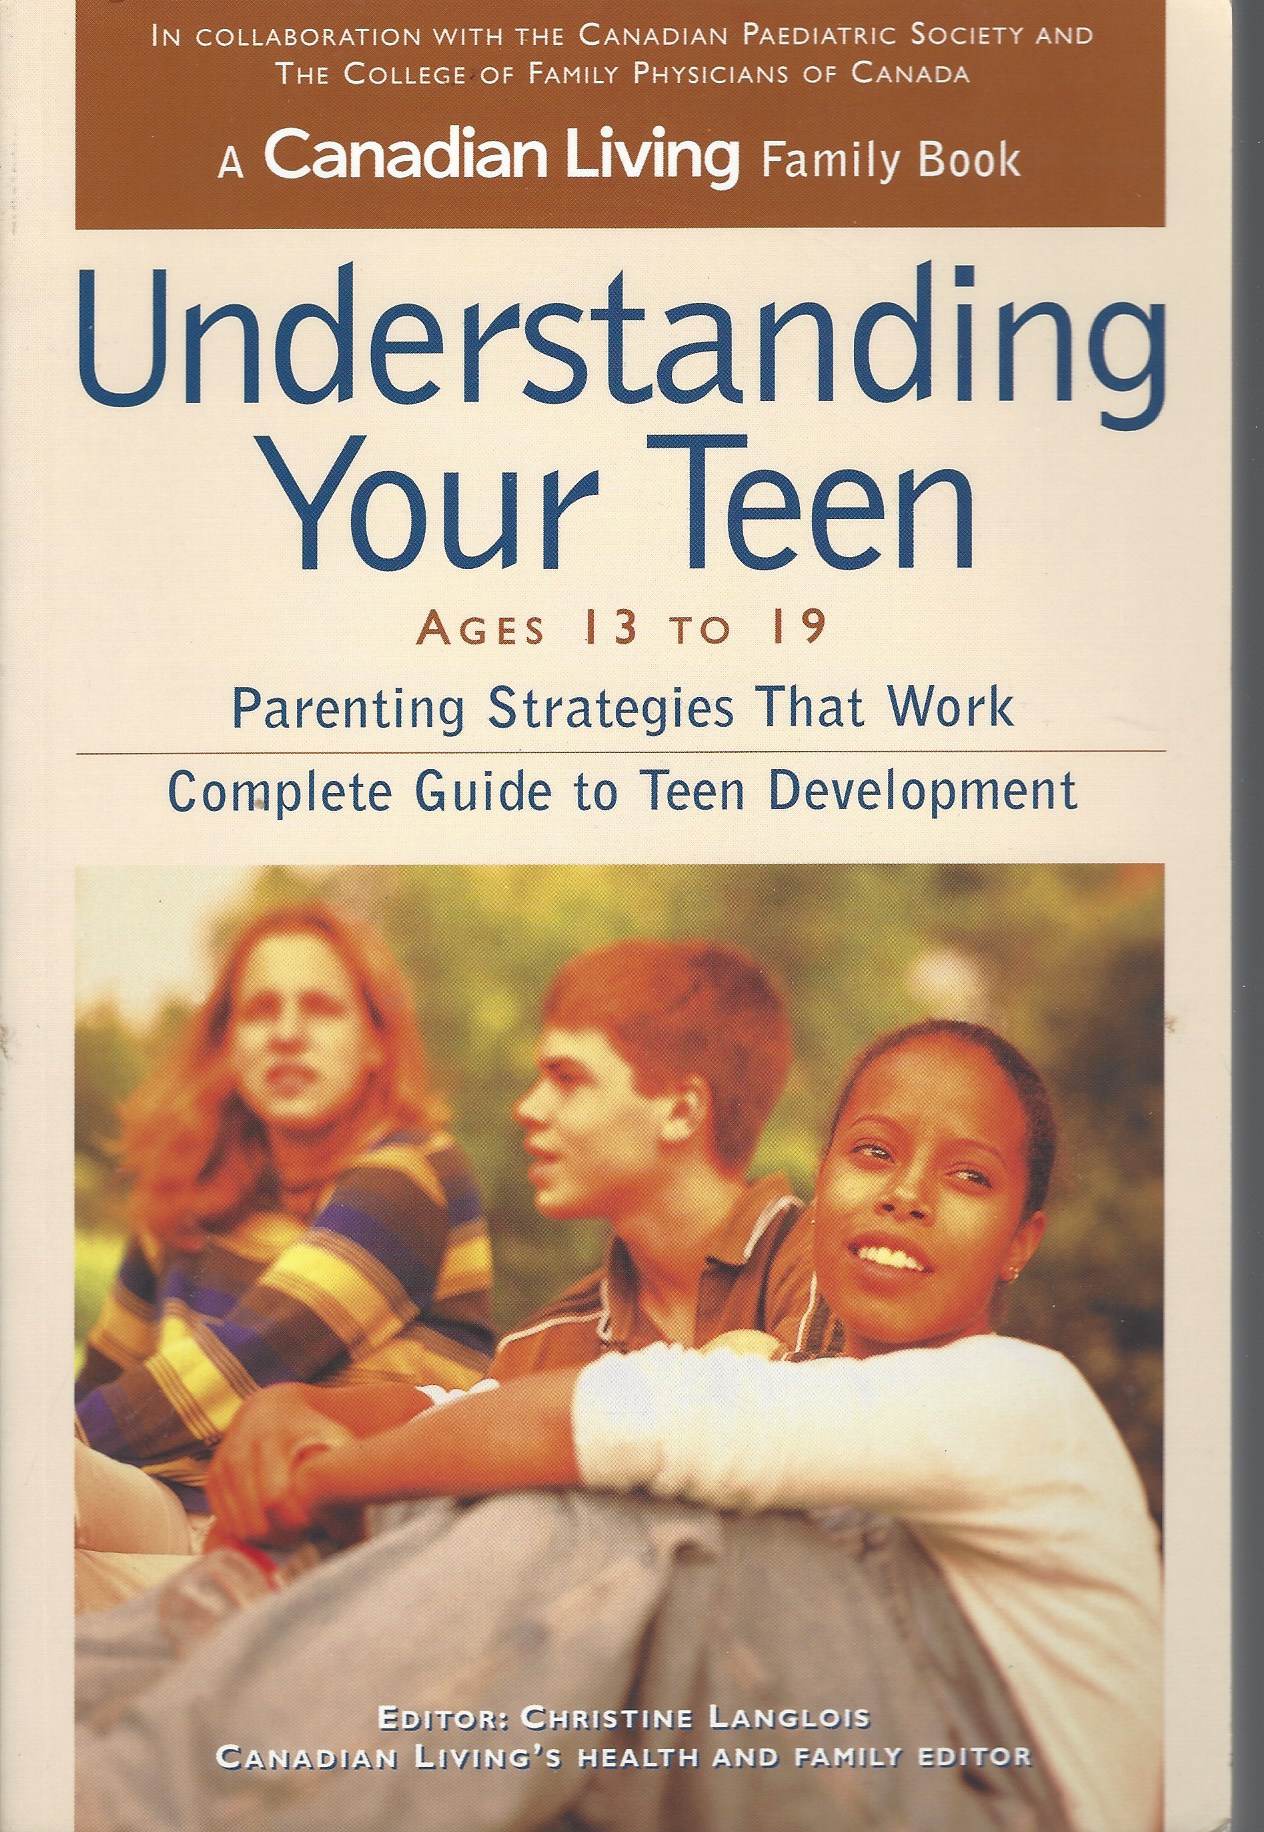 LANGLOIS CHRISTINE (EDITOR) - Understanding Your Teen: Ages 13 to 19 Parenting Strategies That Work